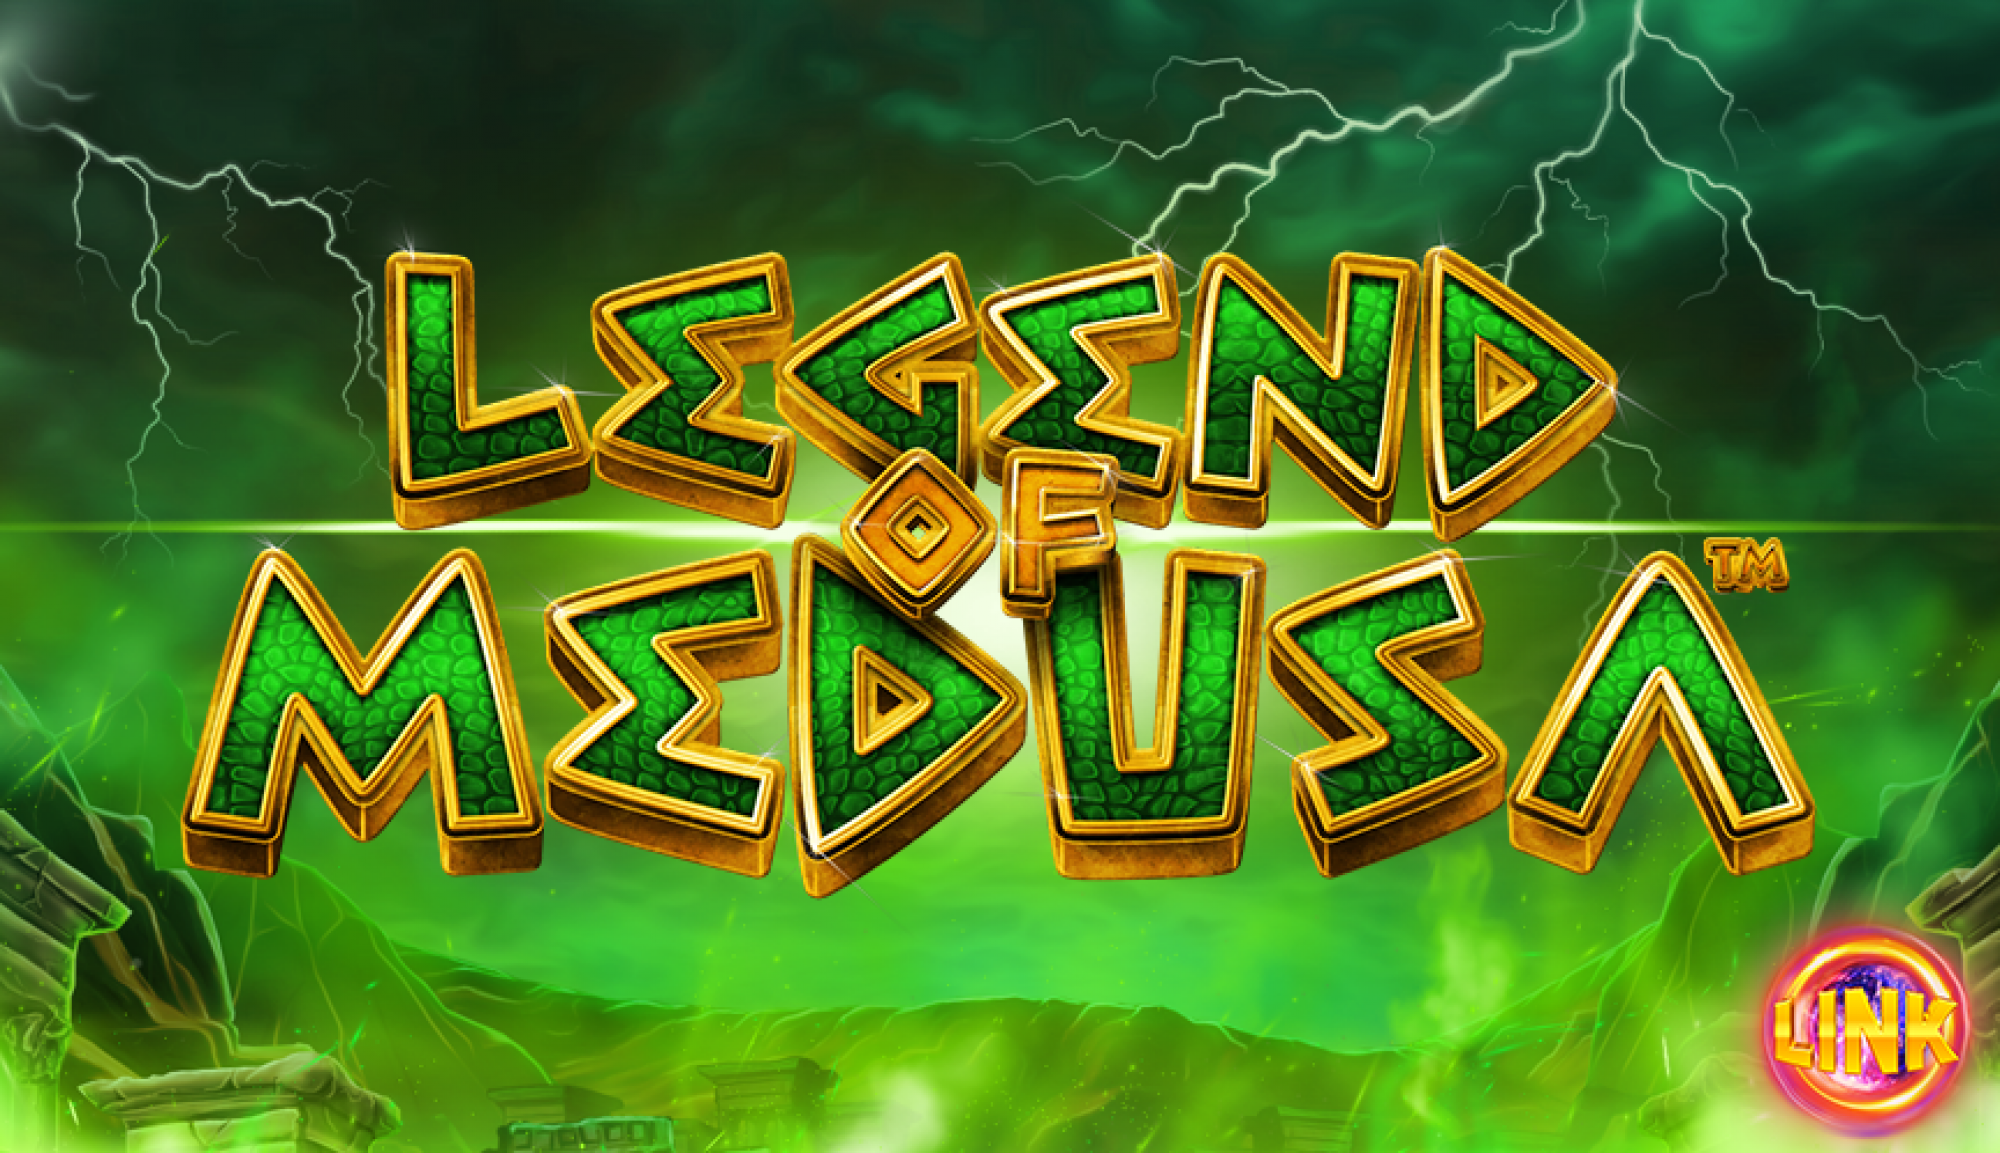 legend of medusa game by synot main picture